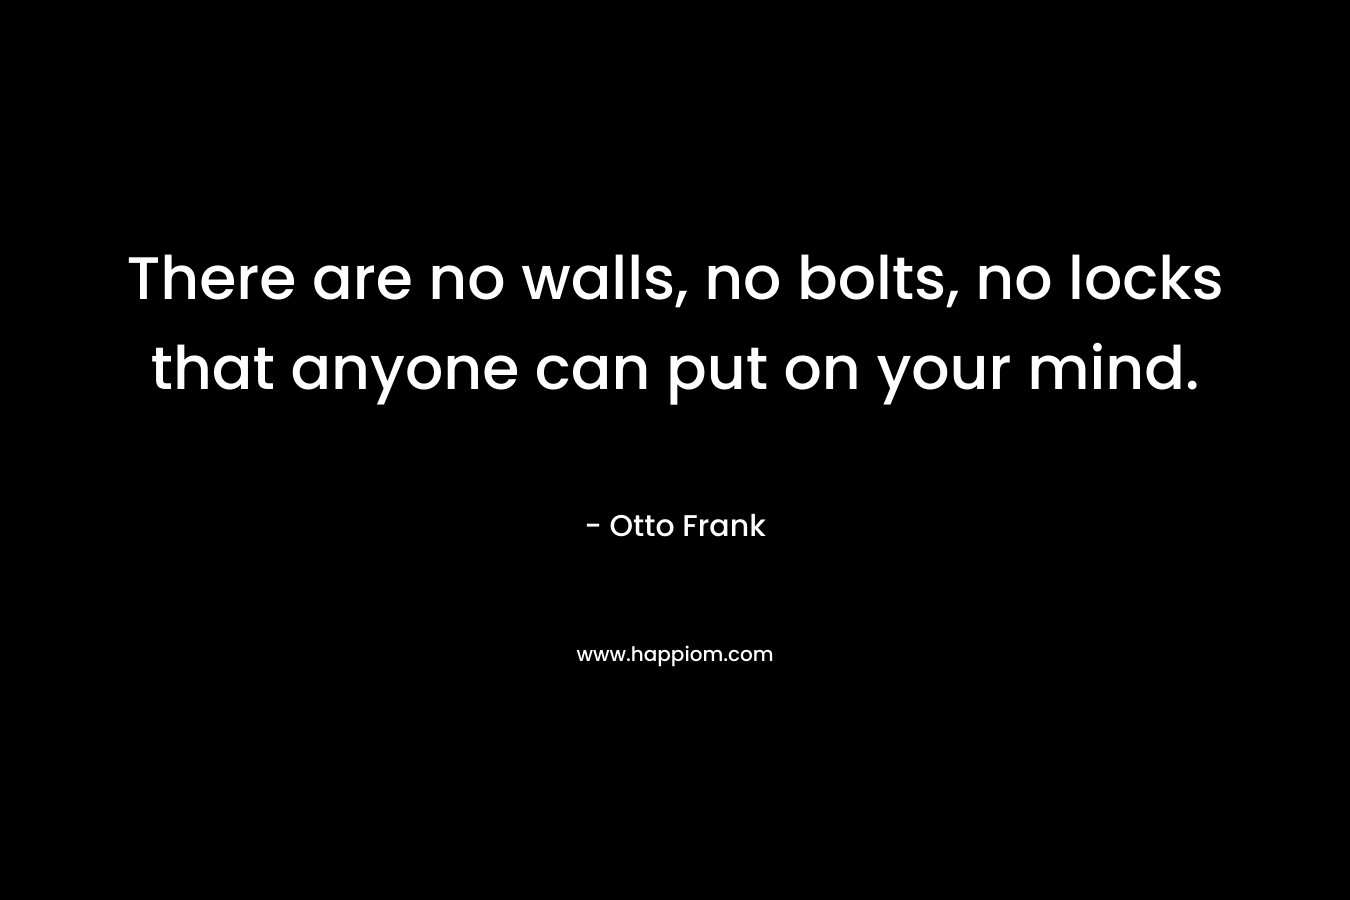 There are no walls, no bolts, no locks that anyone can put on your mind.